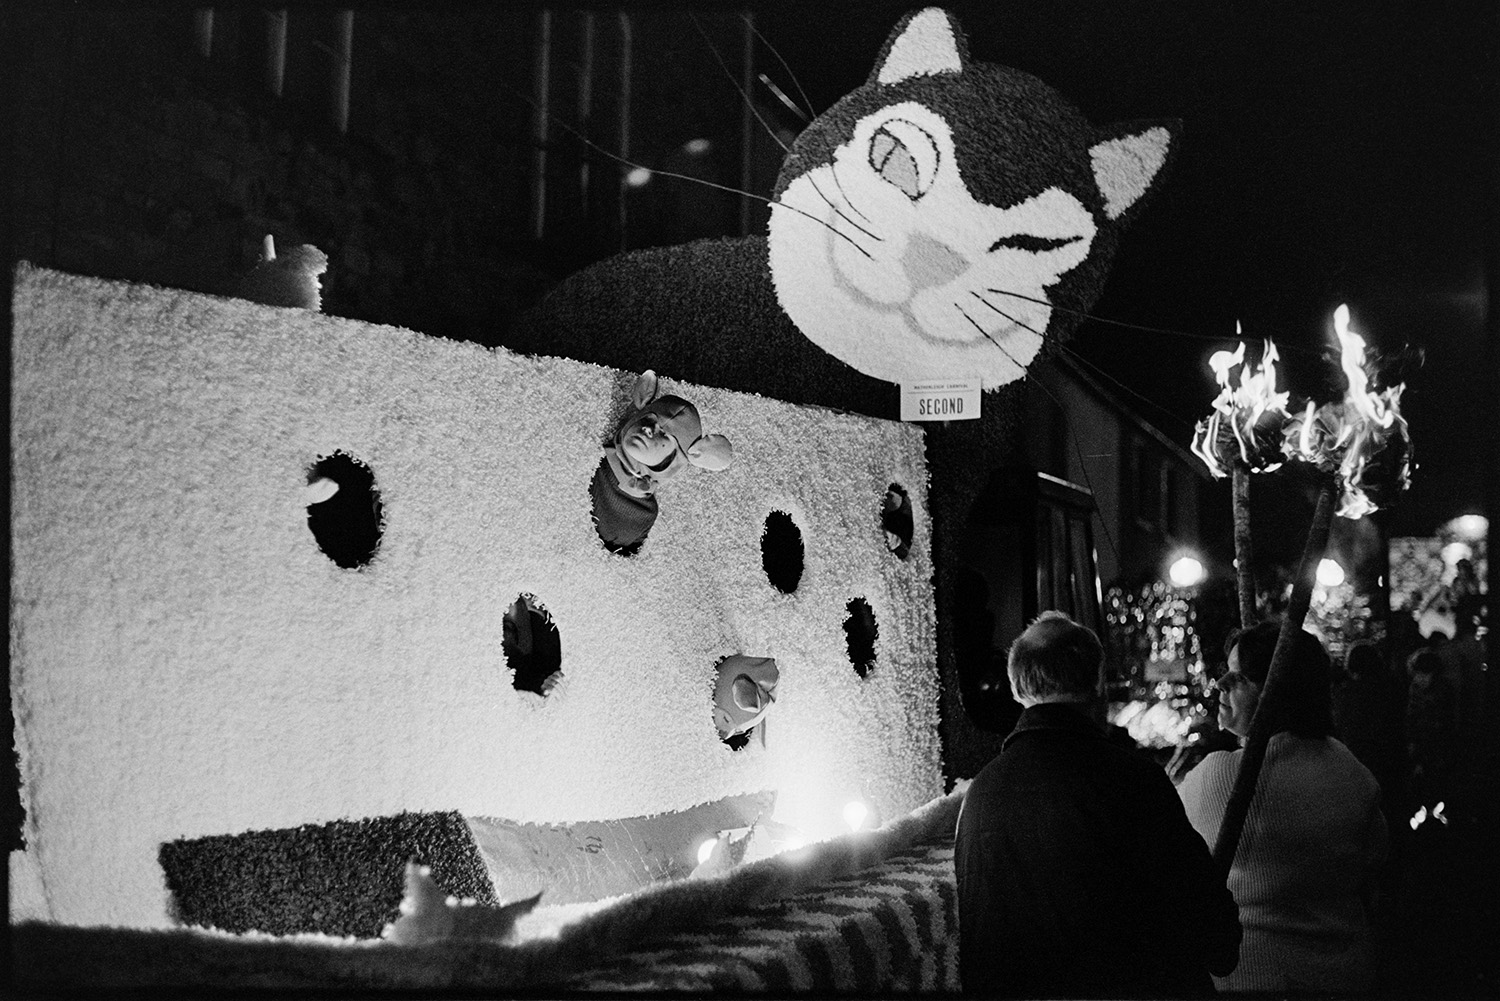 Carnival floats at night with torches. 
[A carnival float with a cat looking for mice in a piece of cheese parading through a street at Hatherleigh carnival, at night. A man and woman are walking past the float holding flaming torches. The float won second prize.]